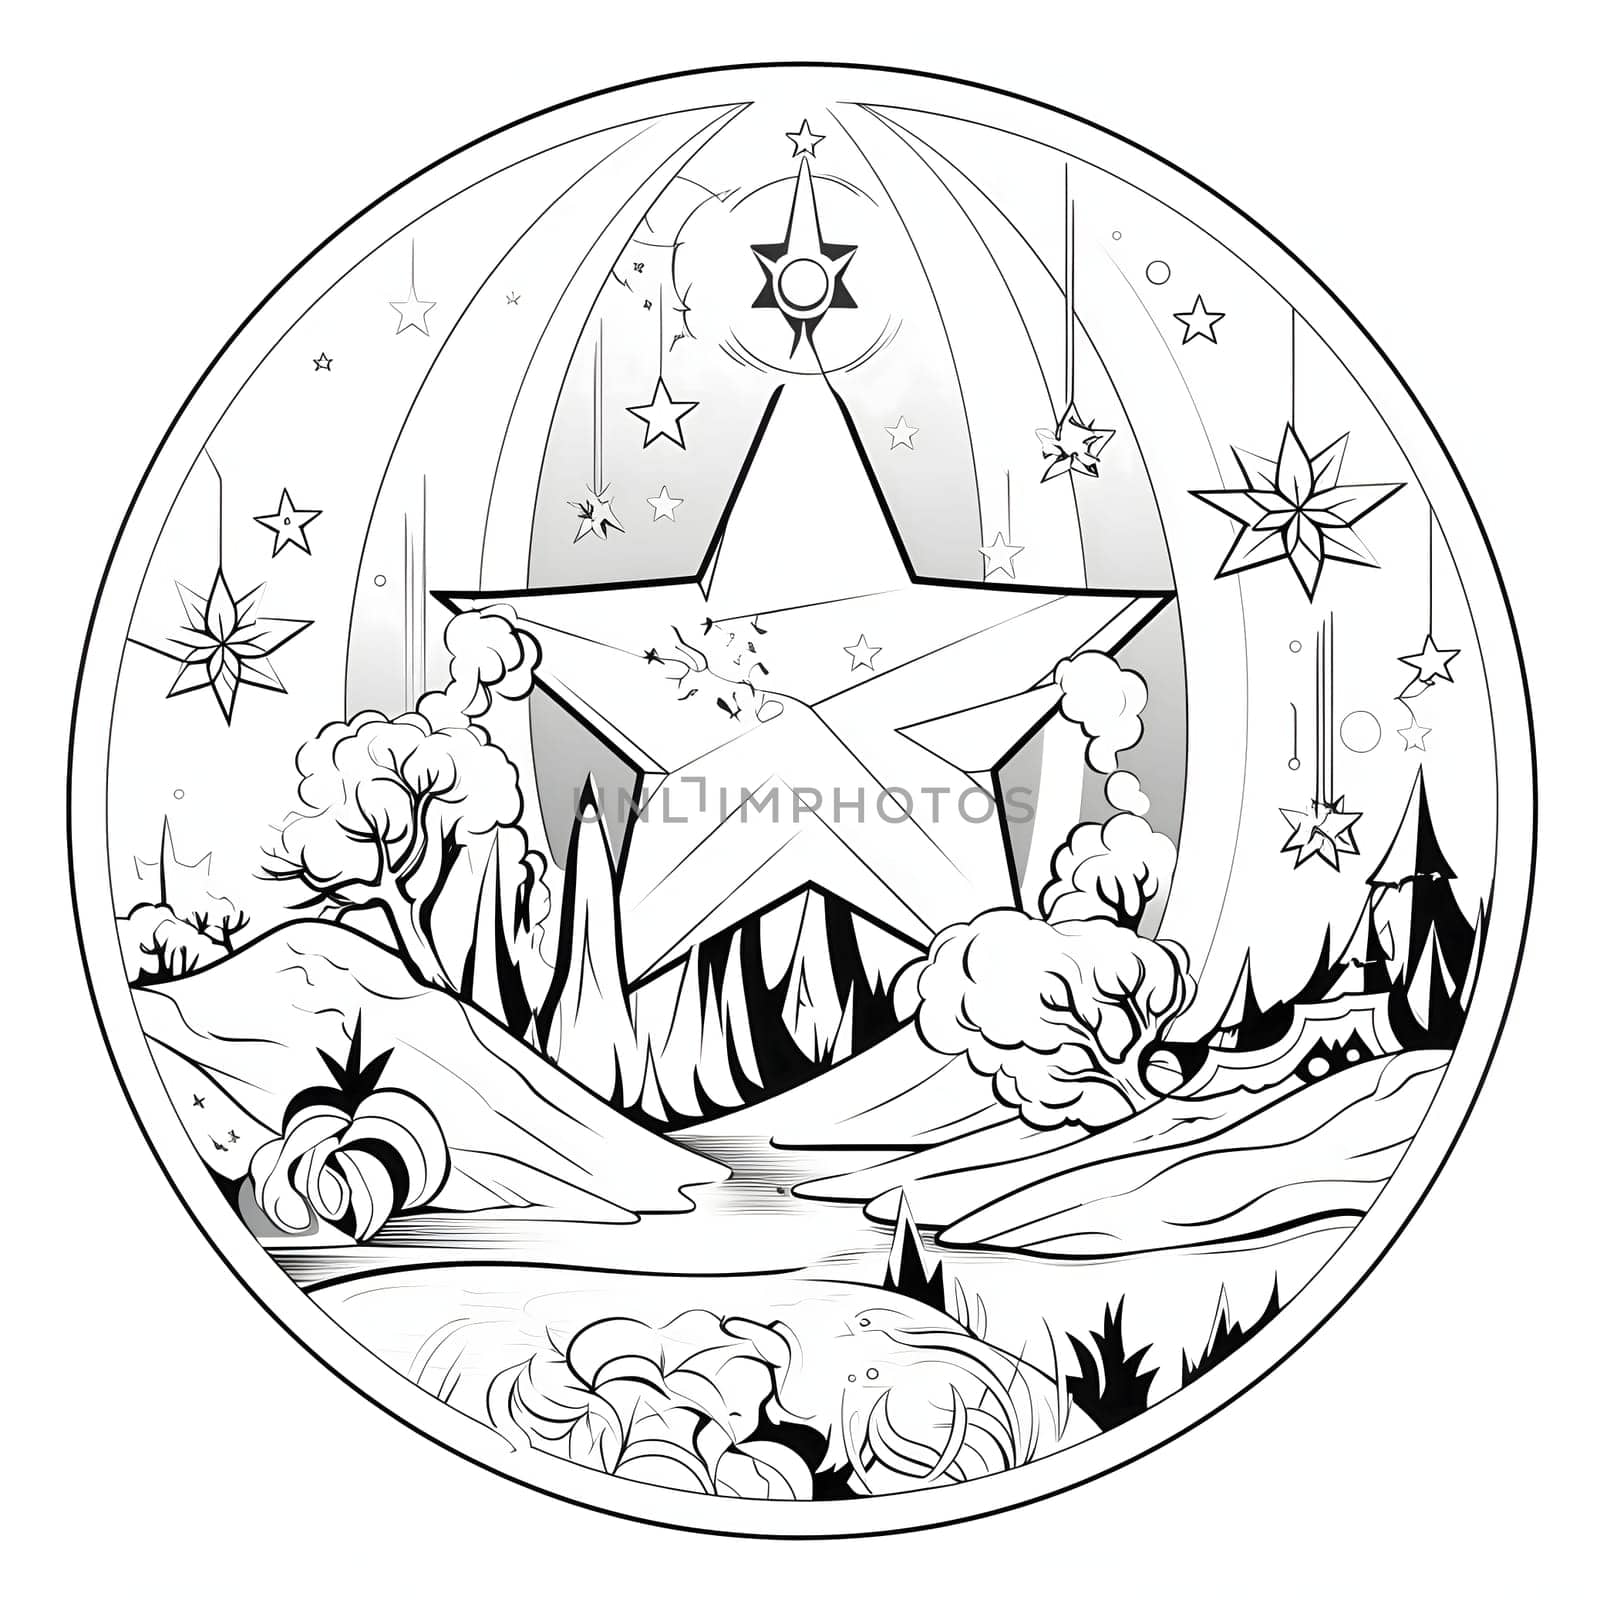 Black and White coloring page; star over a clearing in a circle. The Christmas star as a symbol of the birth of the savior. by ThemesS